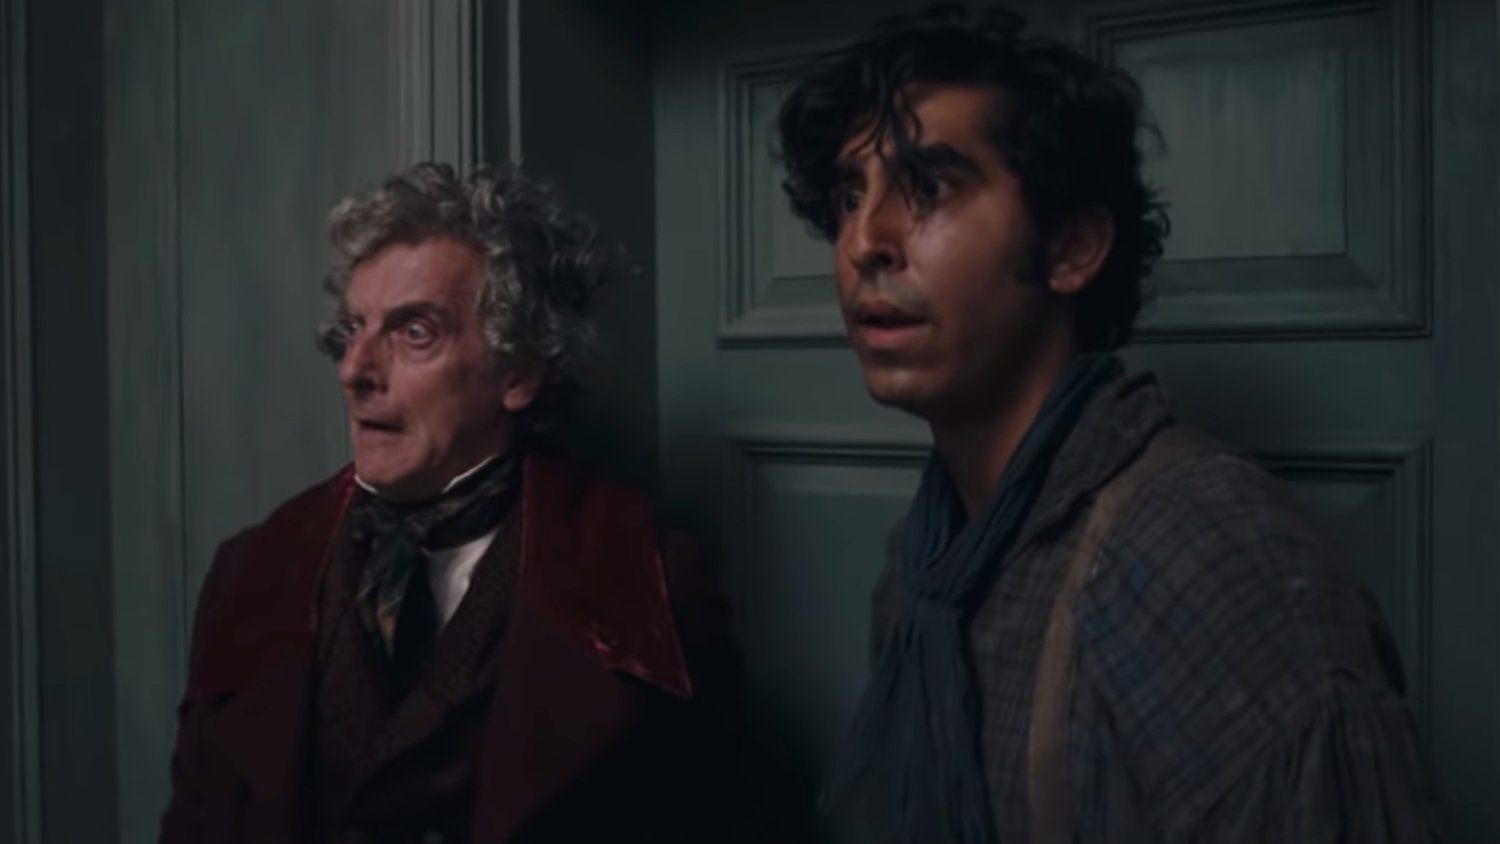 Delightfully Funny Trailer For THE PERSONAL HISTORY OF DAVID COPPERFIELD with Dev Patel